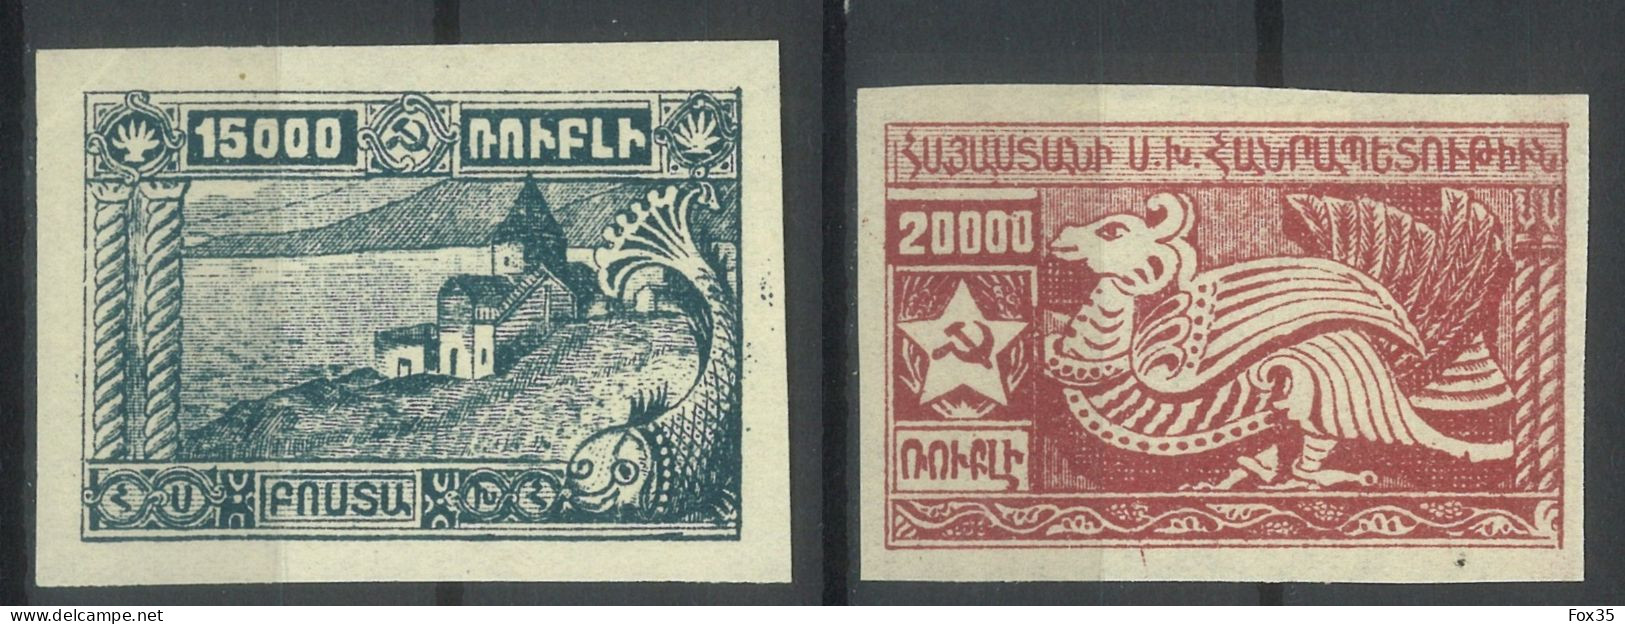 Armenia 1919-1923, 1921 First Constantinople Pictorials Issue set, imperforated, sold as genuine, CV 57€